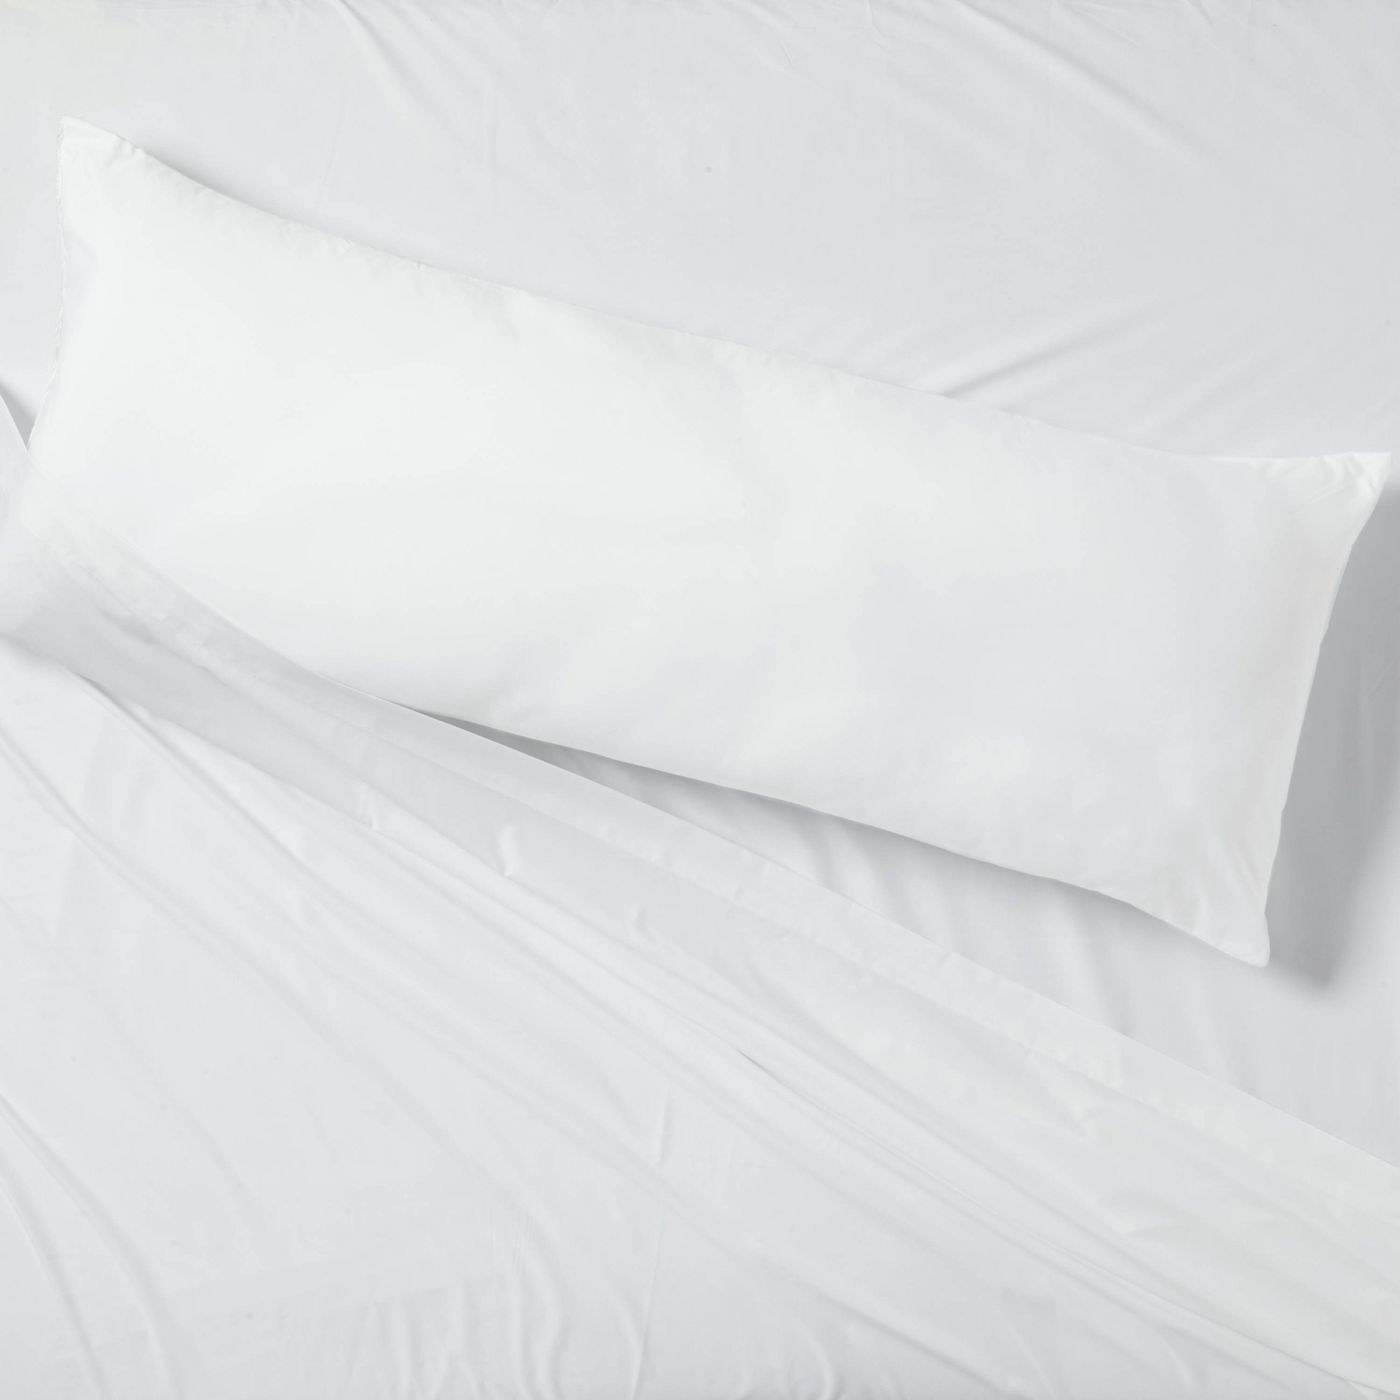 A long body pillow on a white bed